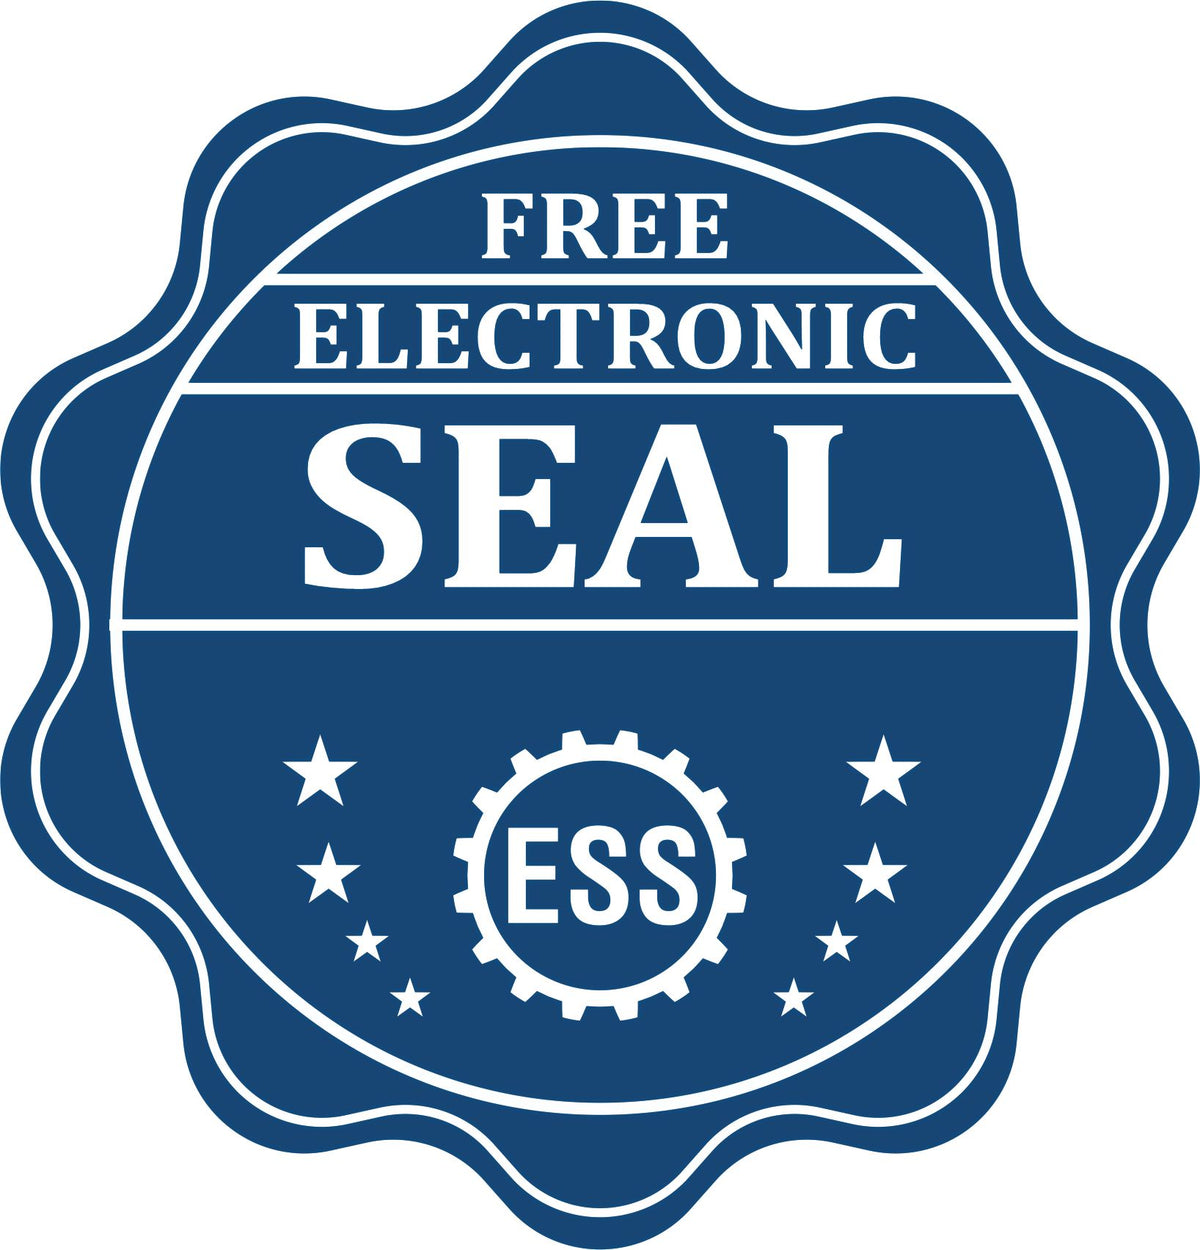 A badge showing a free electronic seal for the State of Idaho Architectural Seal Embosser with stars and the ESS gear on the emblem.